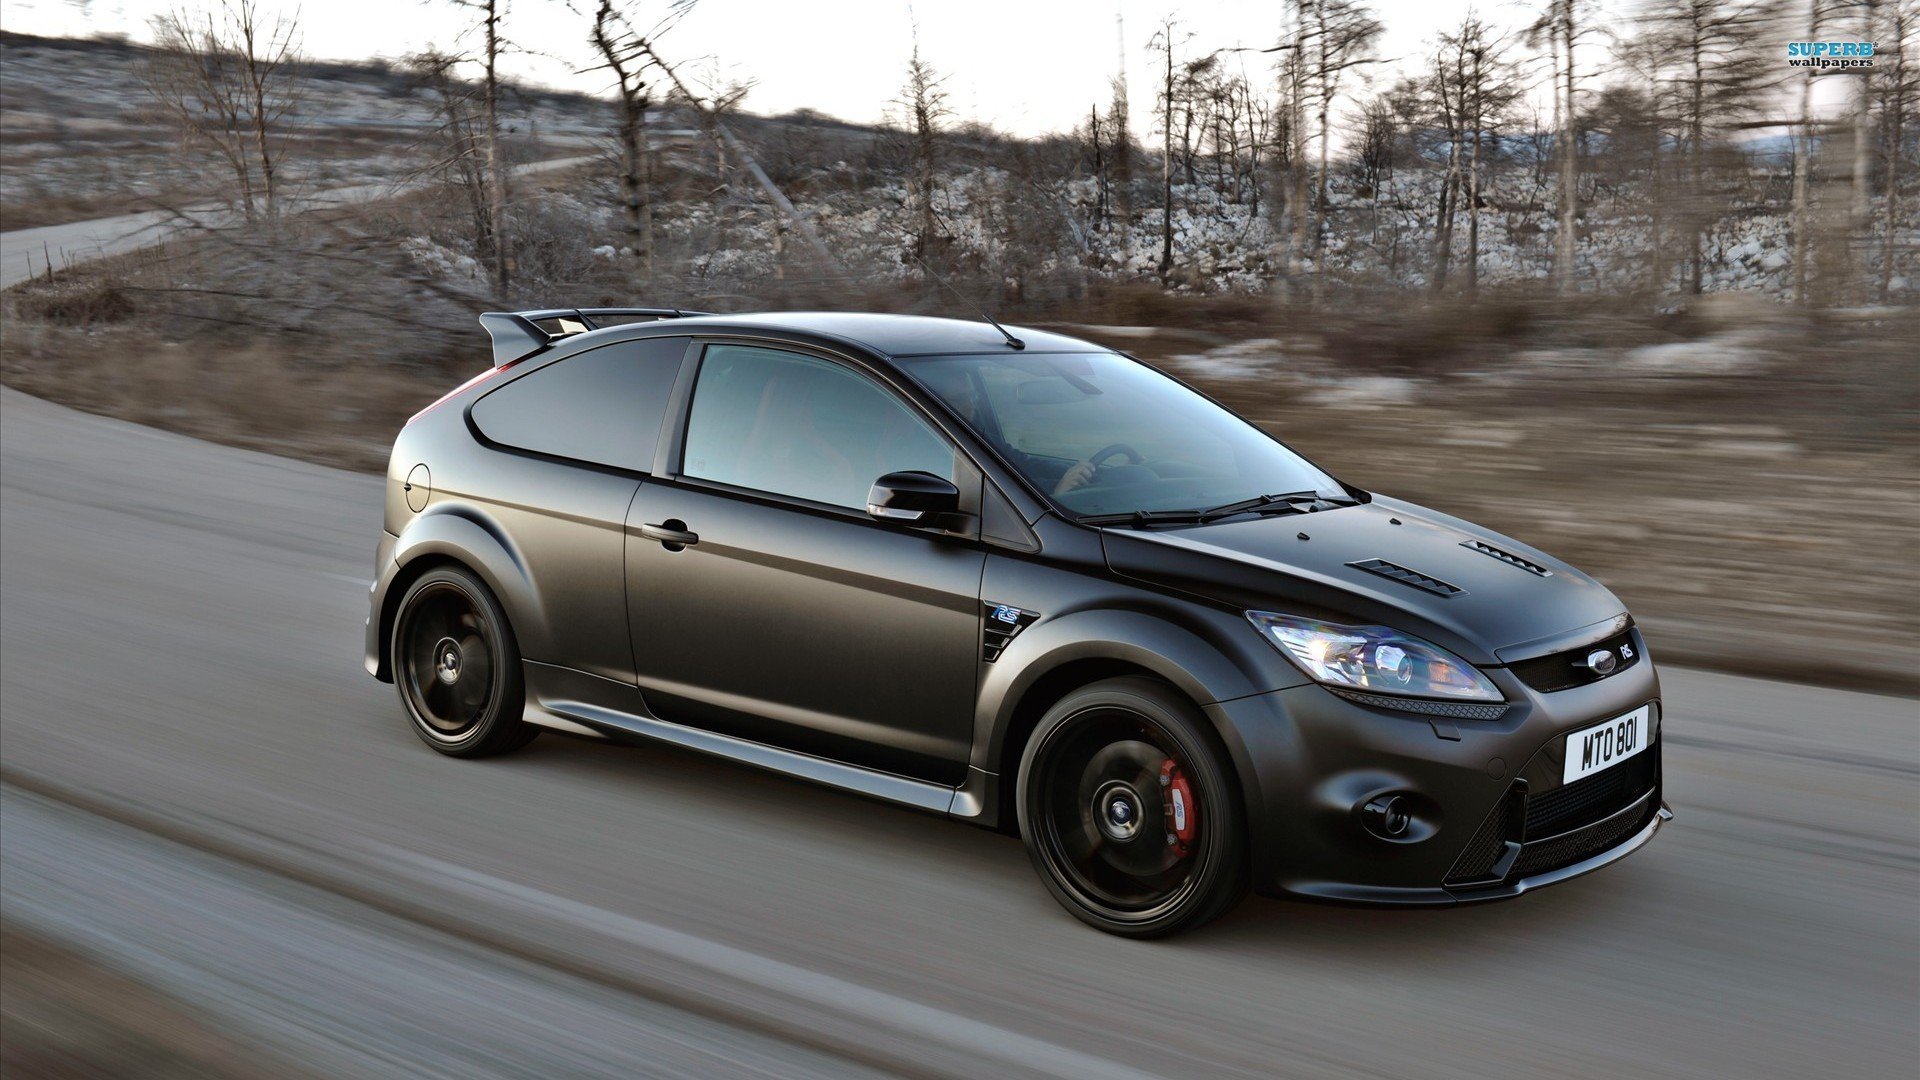 10 Ford Focus Rs Hd Wallpapers Background Images